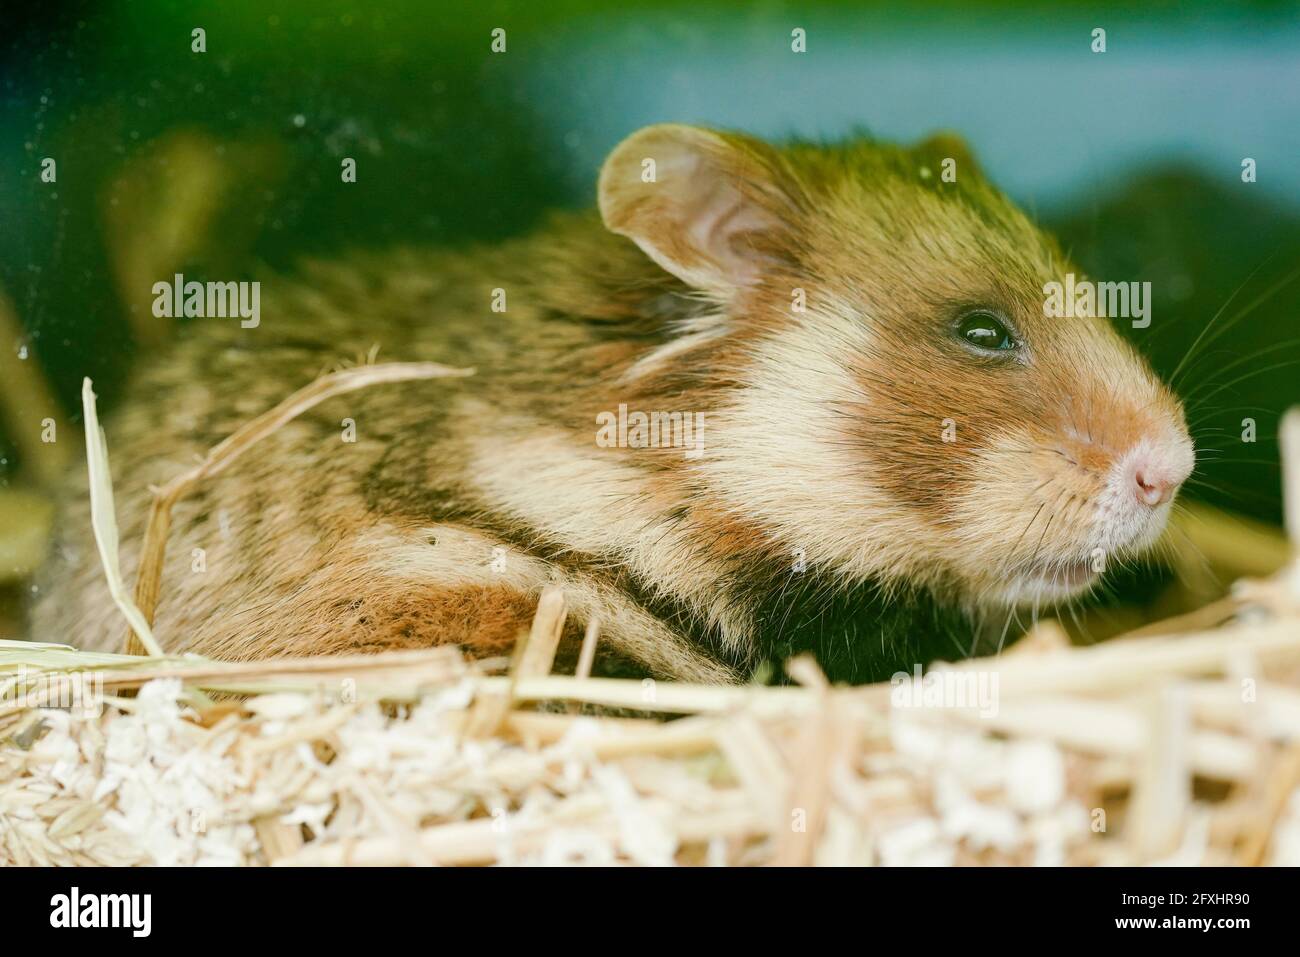 Mannheim, Germany. 27th May, 2021. A field hamster sits in a transport box.  The Regional Council of Karlsruhe and the City of Mannheim are continuing  their project to reintroduce the field hamster,